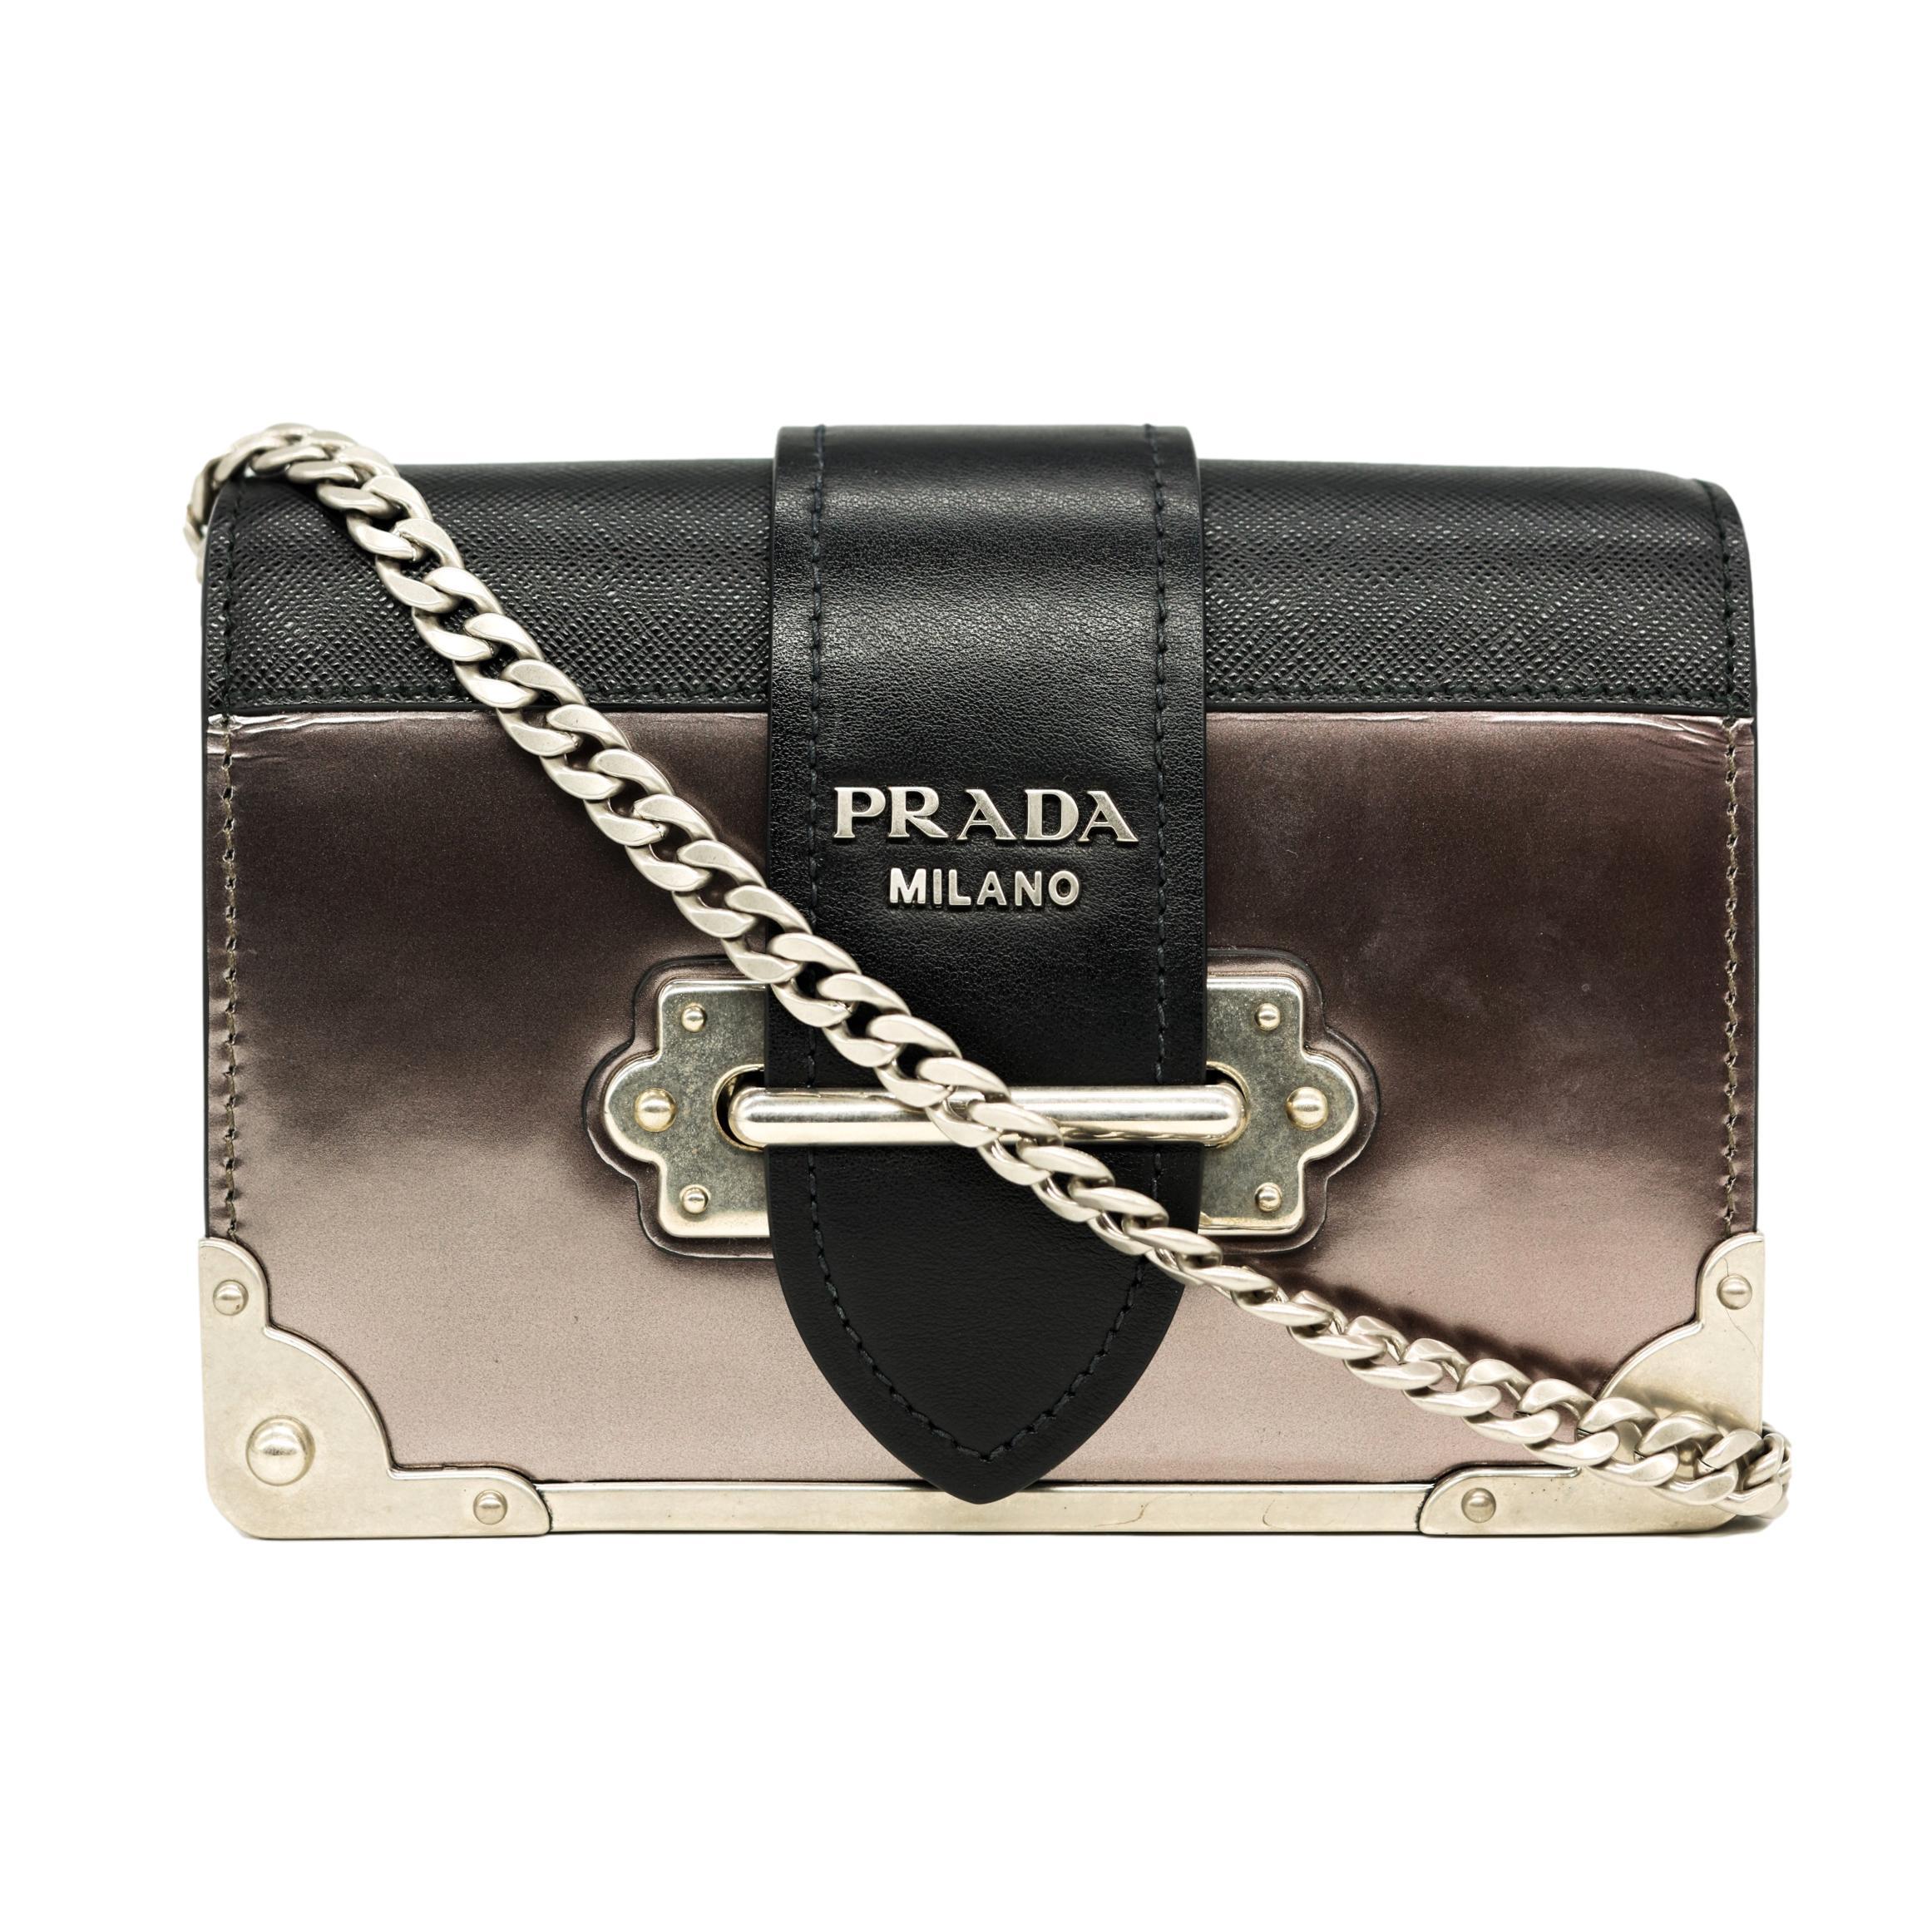 Prada Metallic Purple Cahier Saffiano Leather and City Calf Crossbody Bag, 2018. Introduced in the fall of 2016, the 